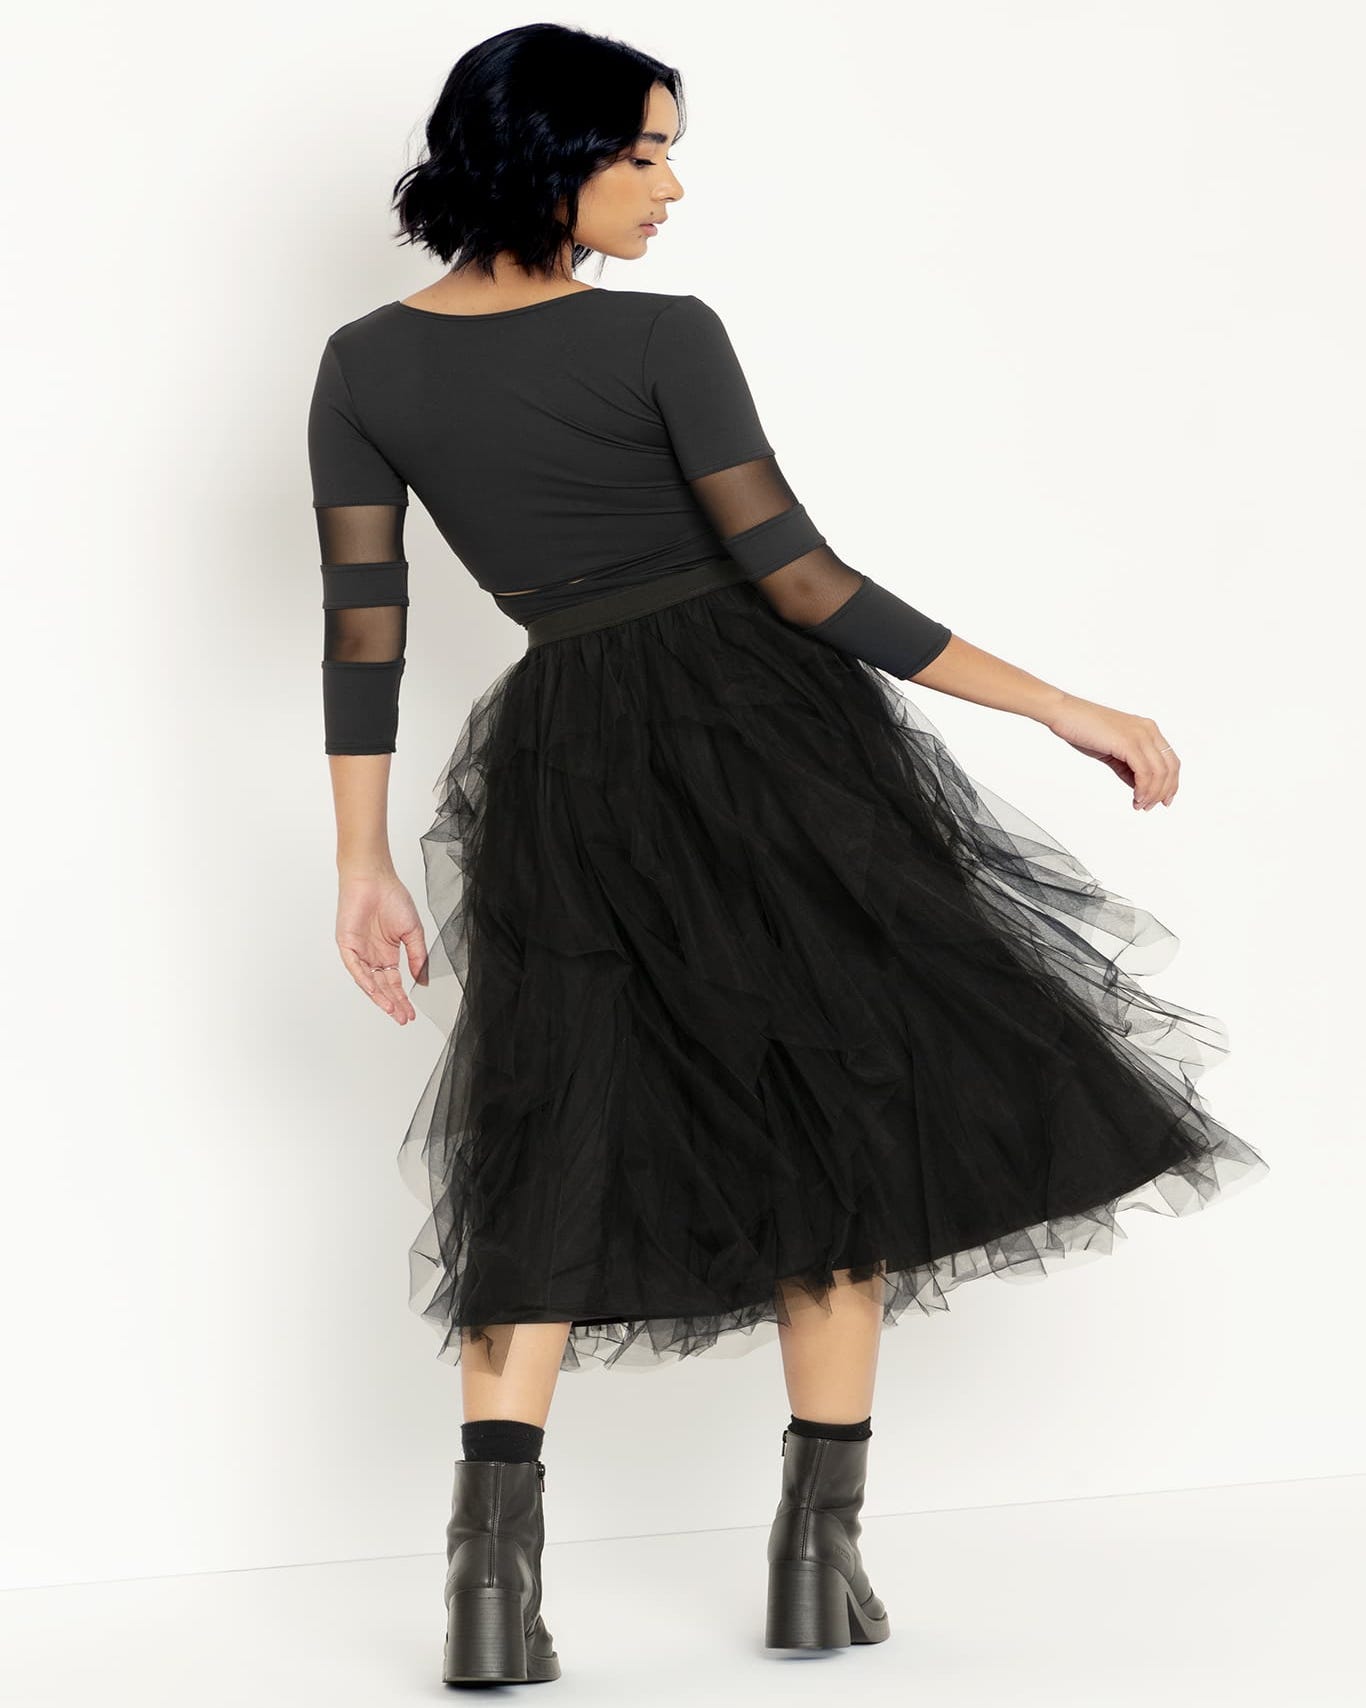 The Black Pirouette Skirt - Limited